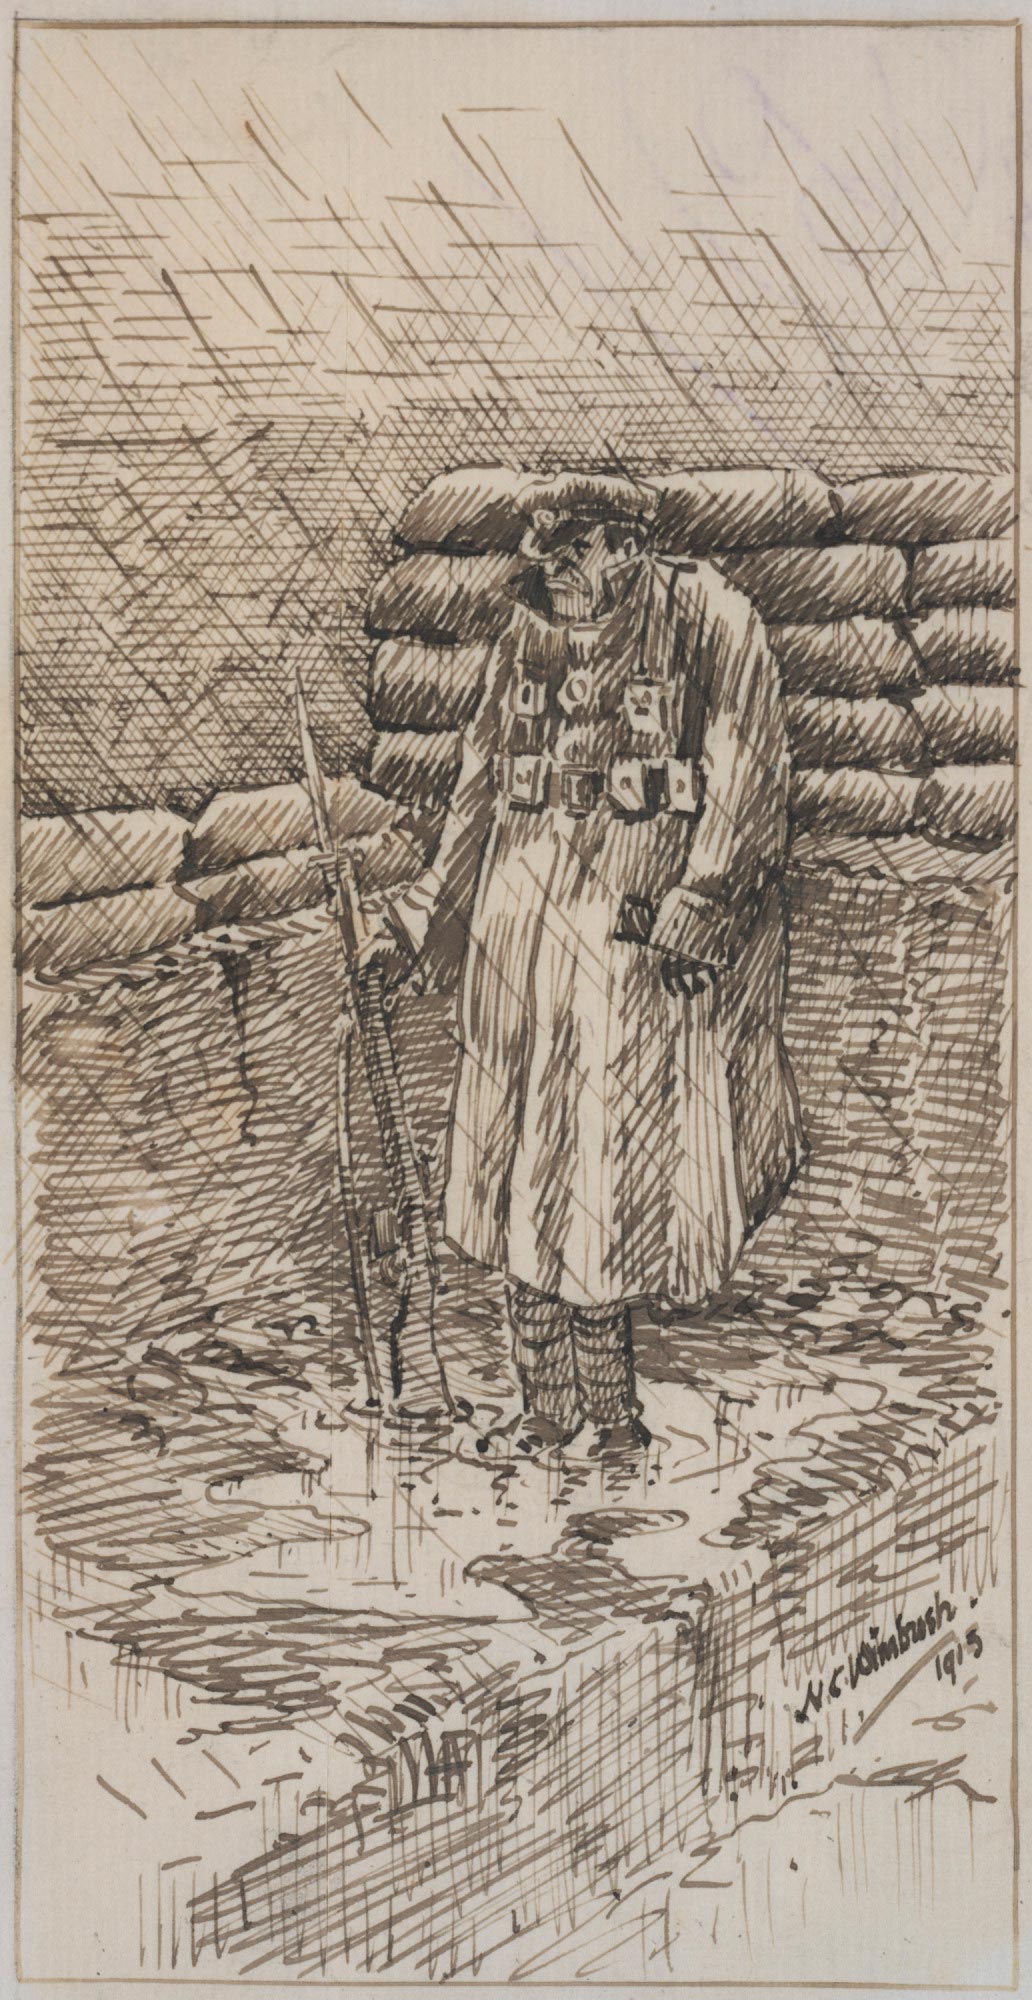 Sketch of a sentry standing in the pouring rain at Gallipoli, 1915.